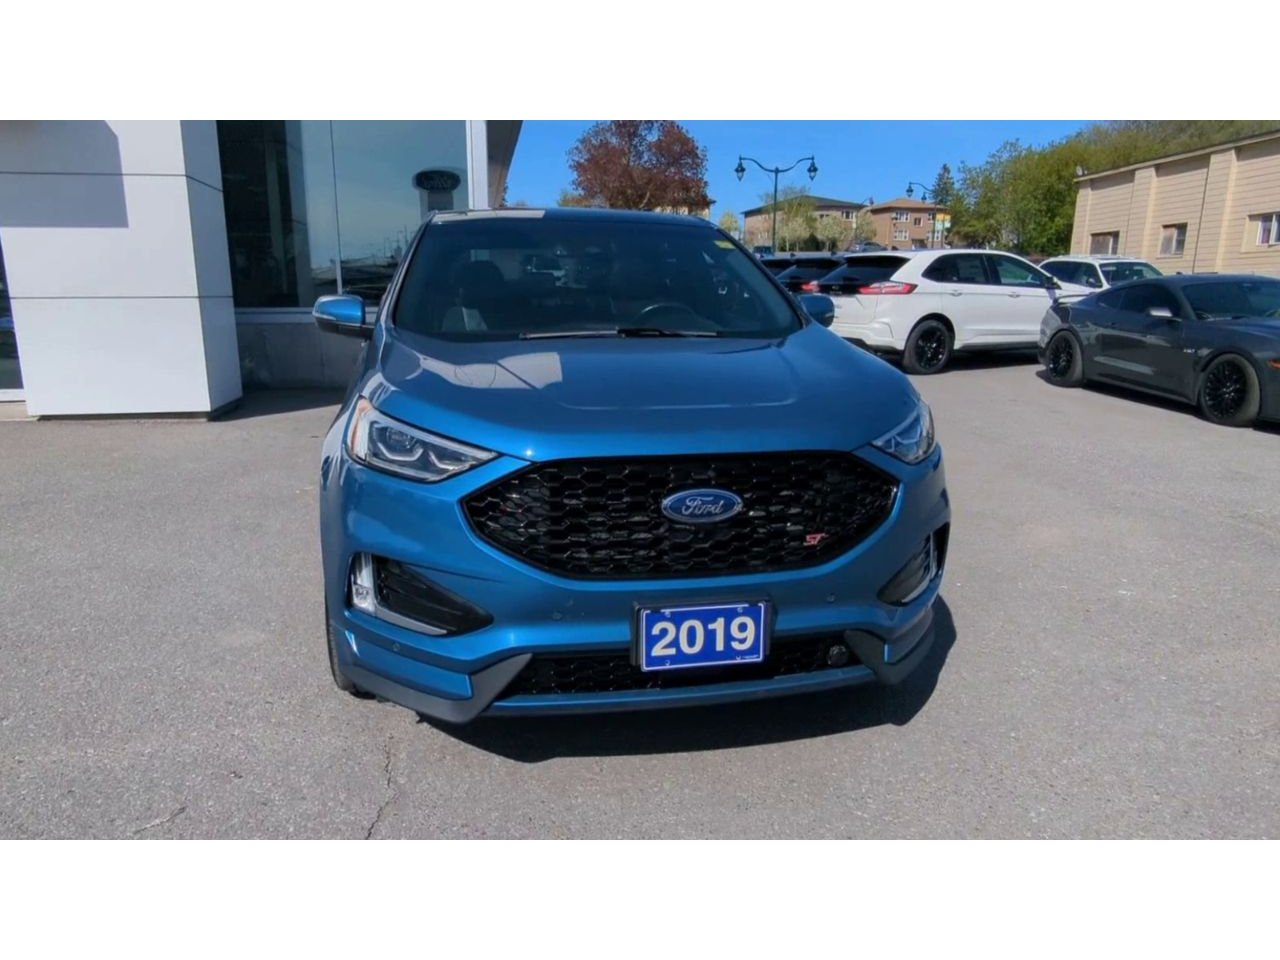 2019 Ford Edge - 21832A Full Image 3